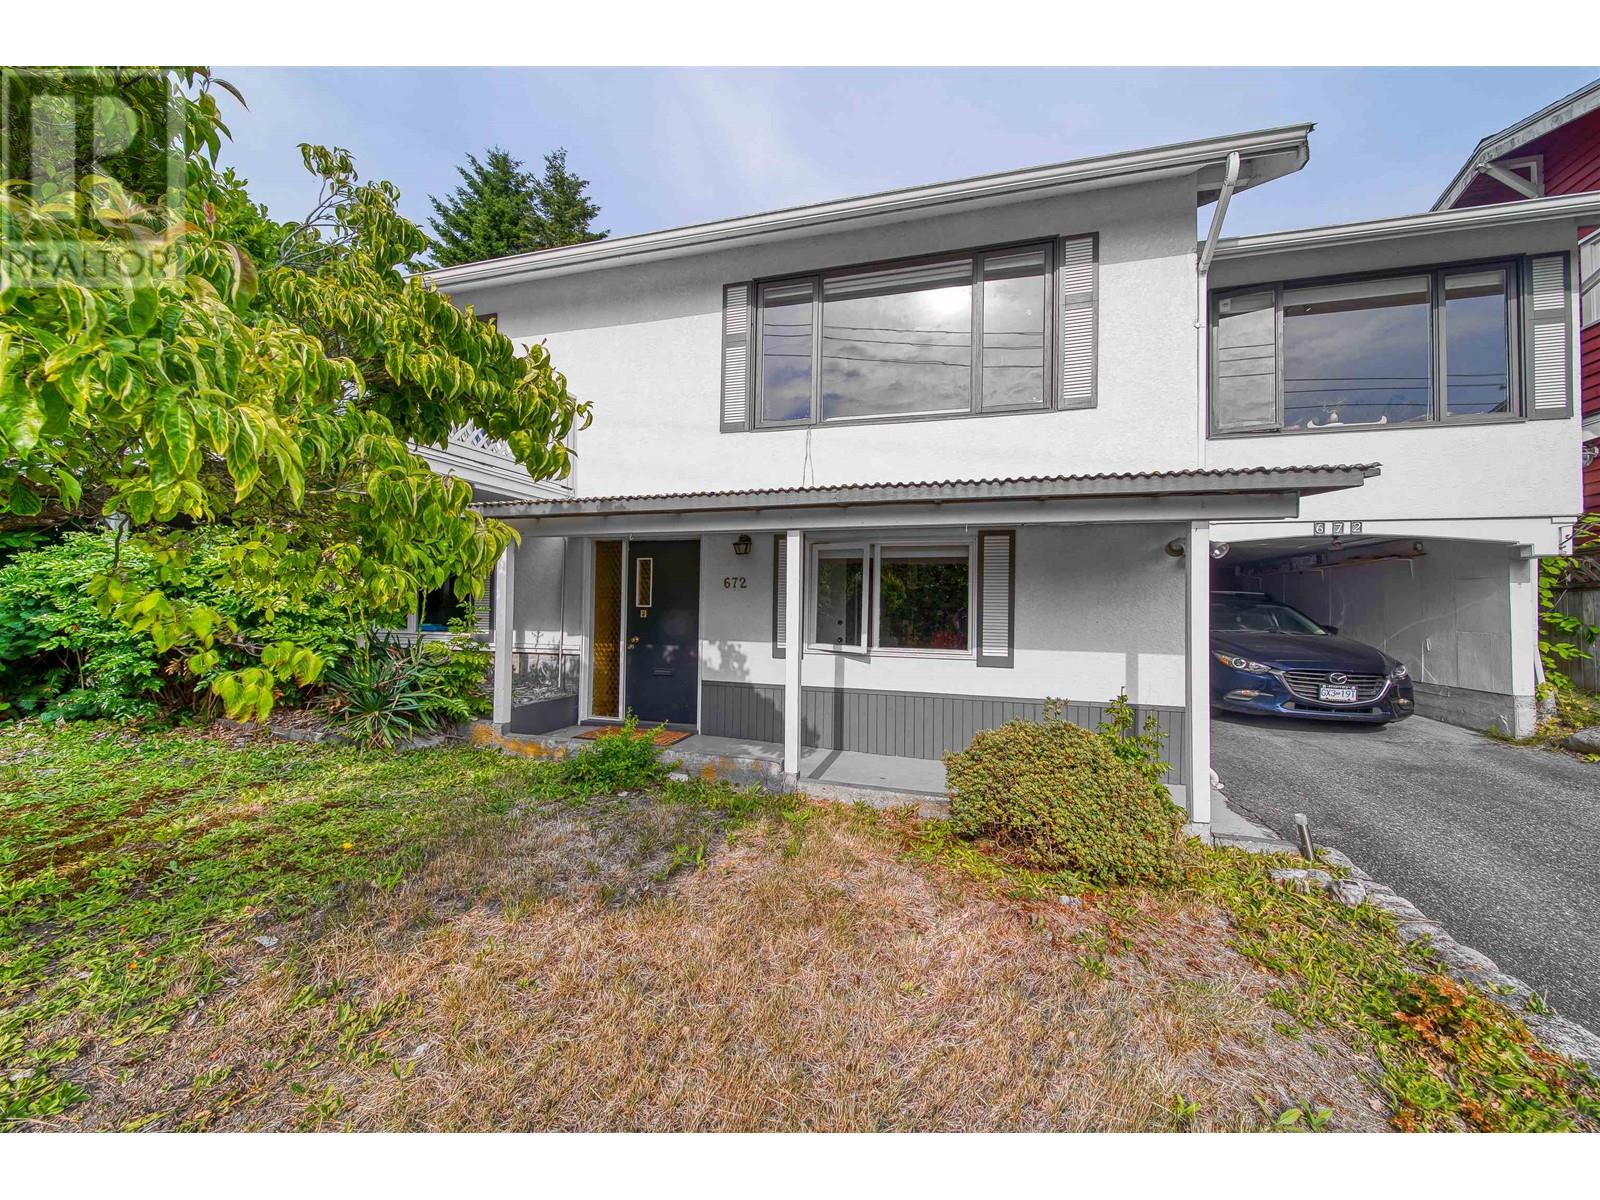 672 11TH STREET, West Vancouver